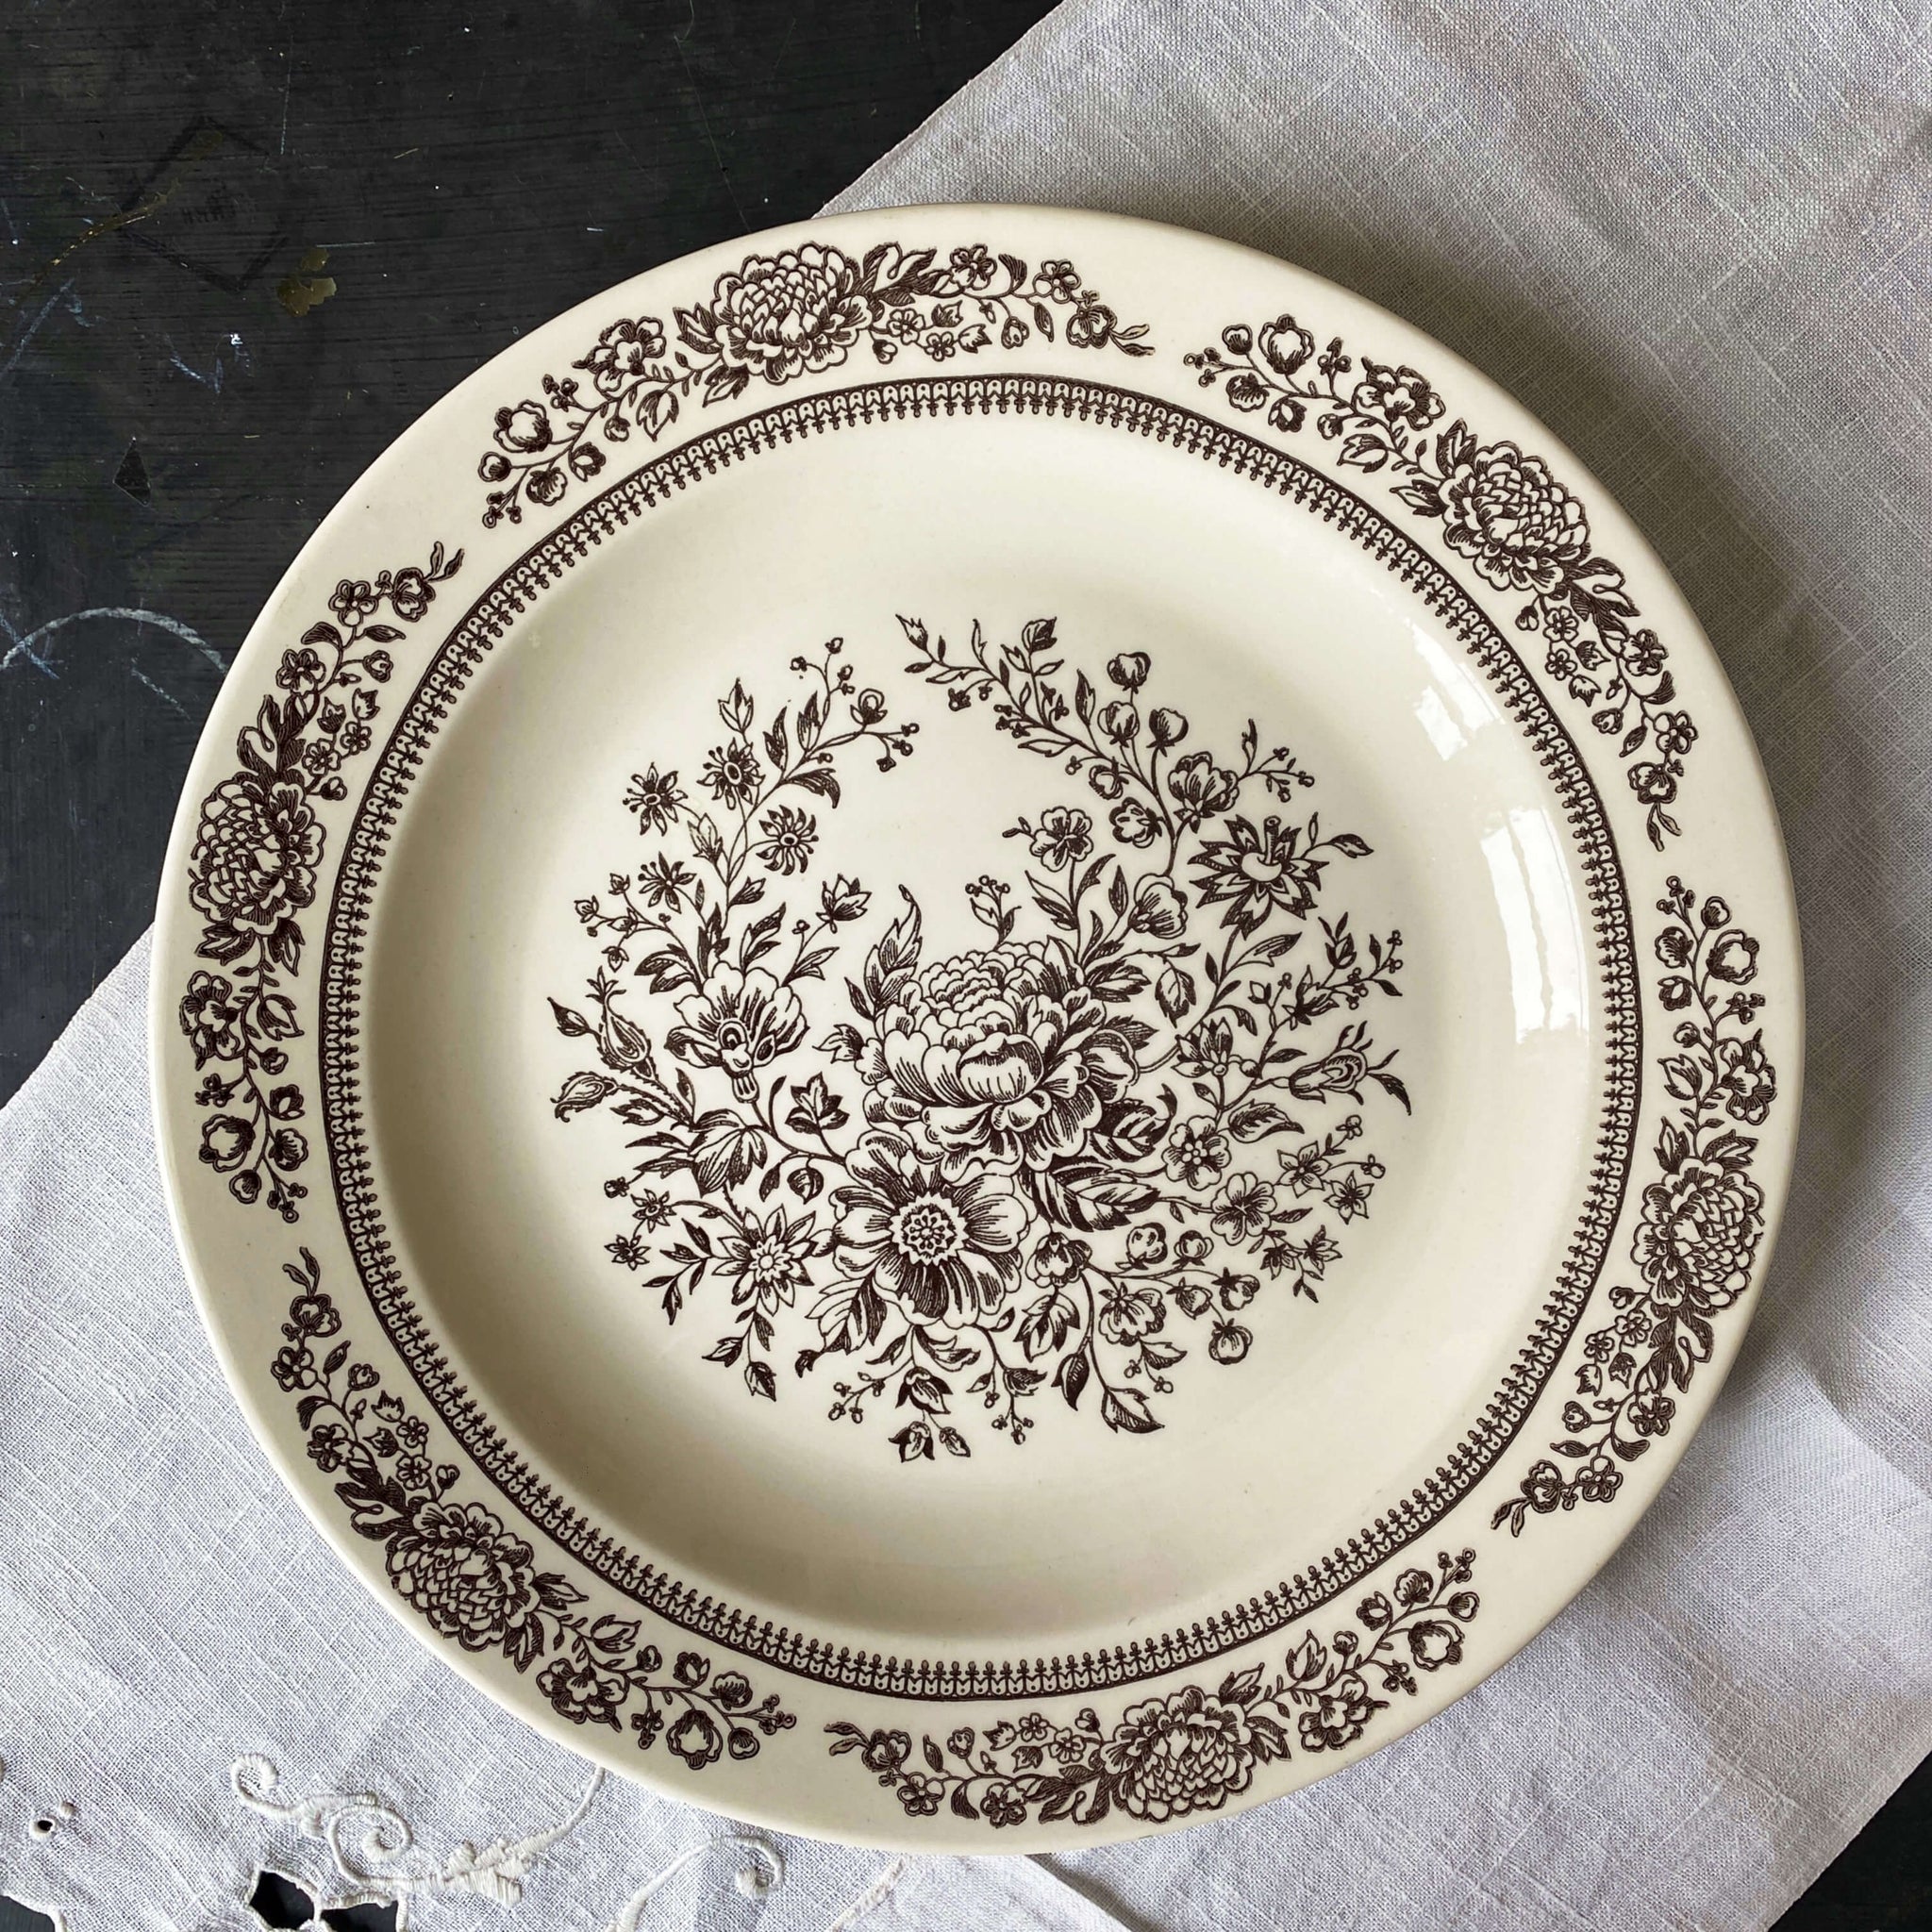 Vintage Royal Sussex Chop Plate Platter - Brown and White Floral circa 1980s